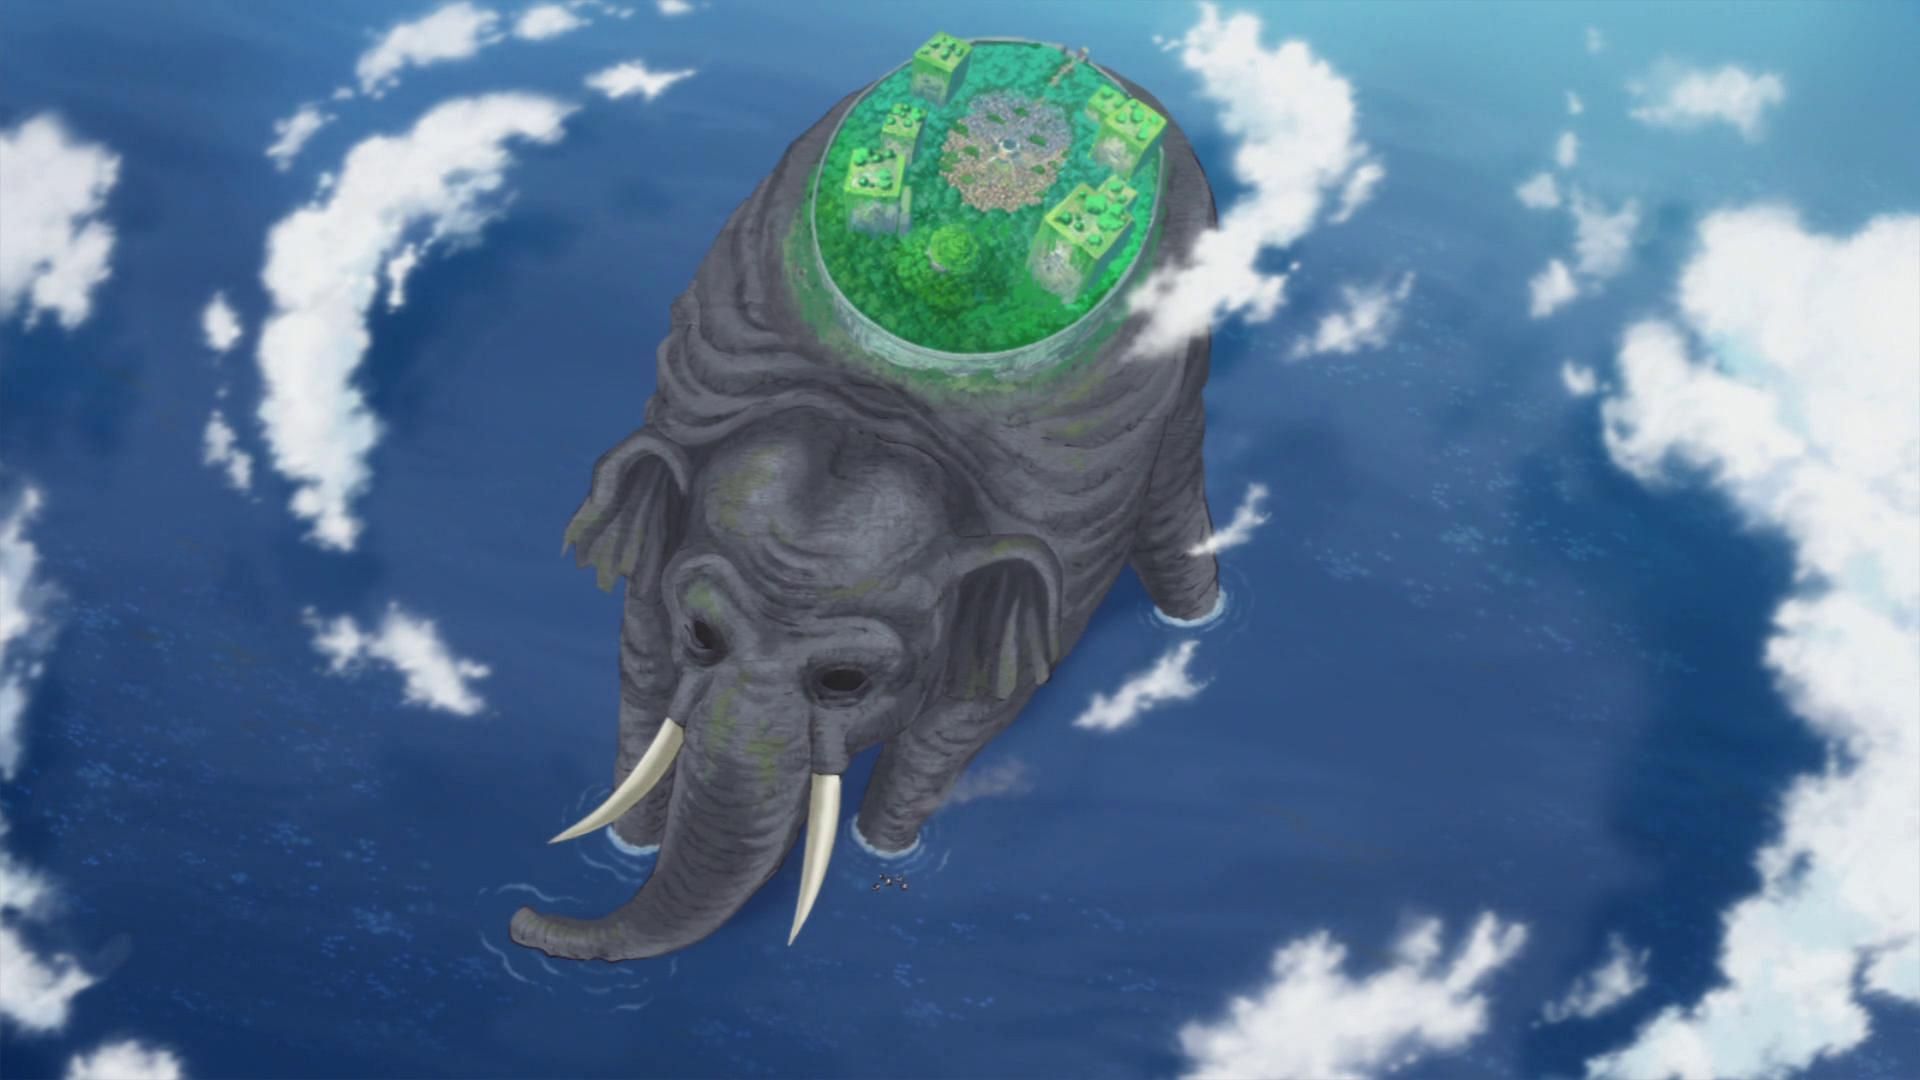 Zunisha is the oldest and largest living character in One Piece (Image via Toei Animation, One Piece)